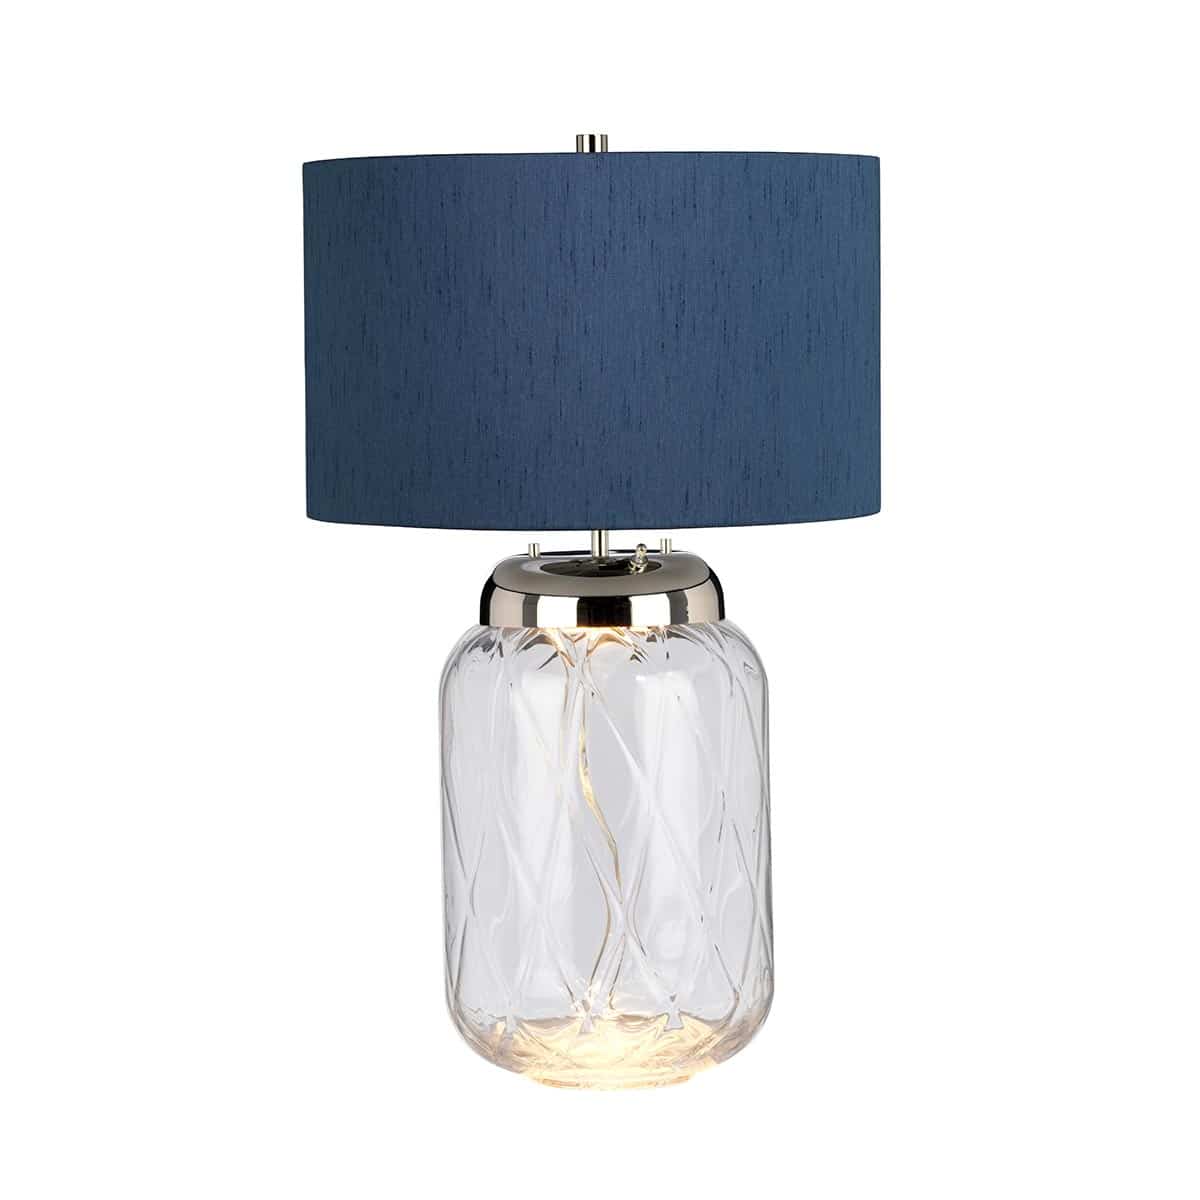 Sola 2 Light Clear Glass Table Lamp Polished Nickel Blue Drum Shade